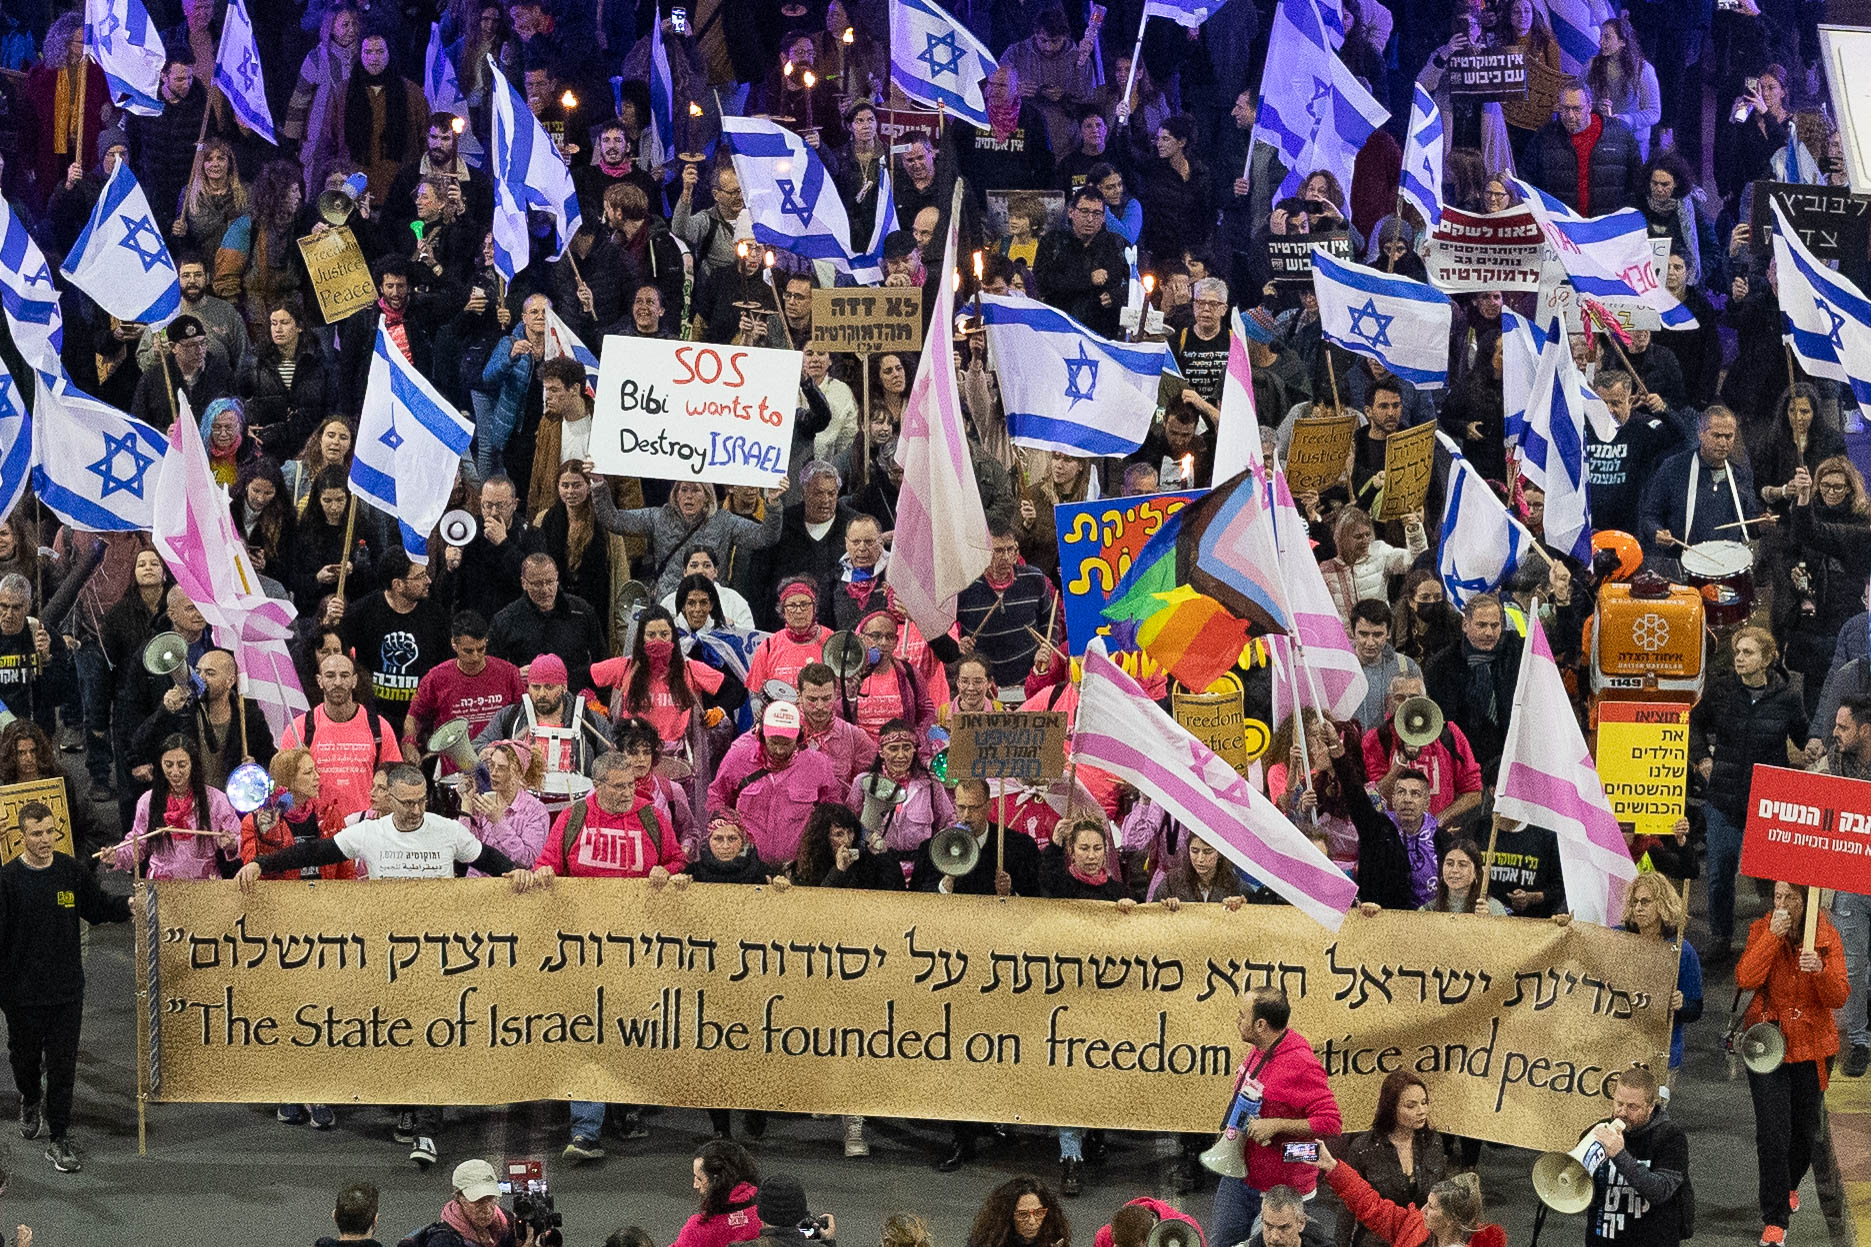 Photo by Erez Harodi of Israel democracy protest in 2023. Photo shows a large crowd of people holding Israeli flags. A large sign in the front reads "The state of Israel will be founded on freedom, justice, and peace" in both English and Hebrew. Another protest sign reads, "SOS Bibi wants to destroy Israel."